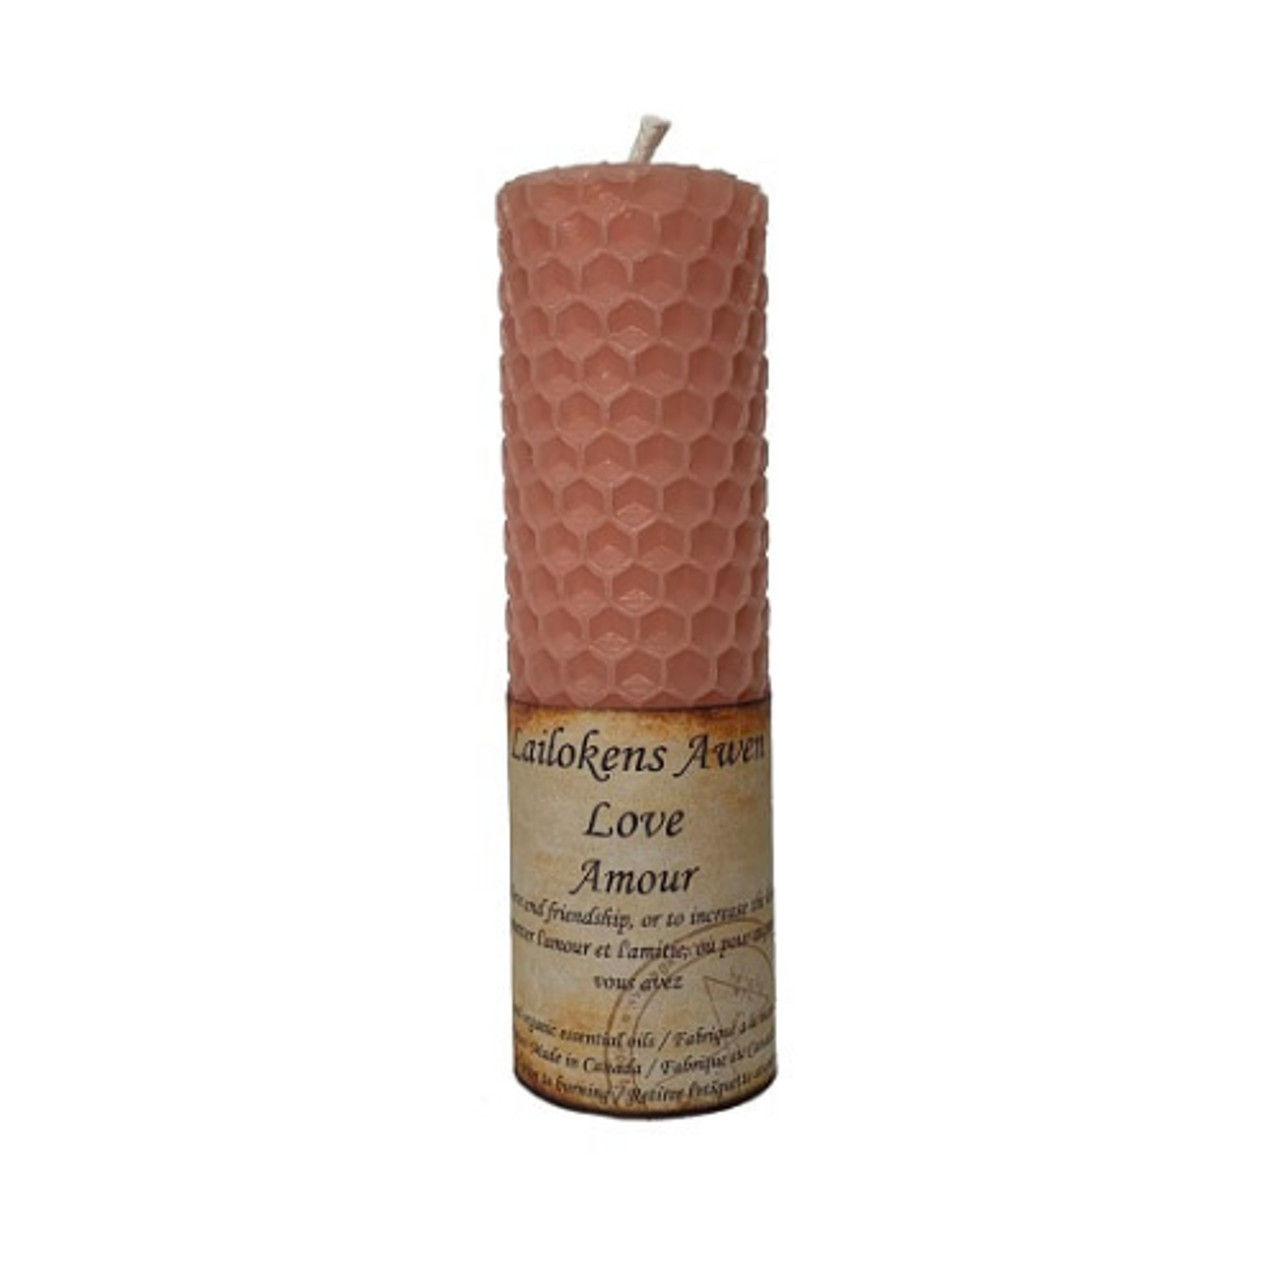 Candle Beeswax 4.25" for Spells